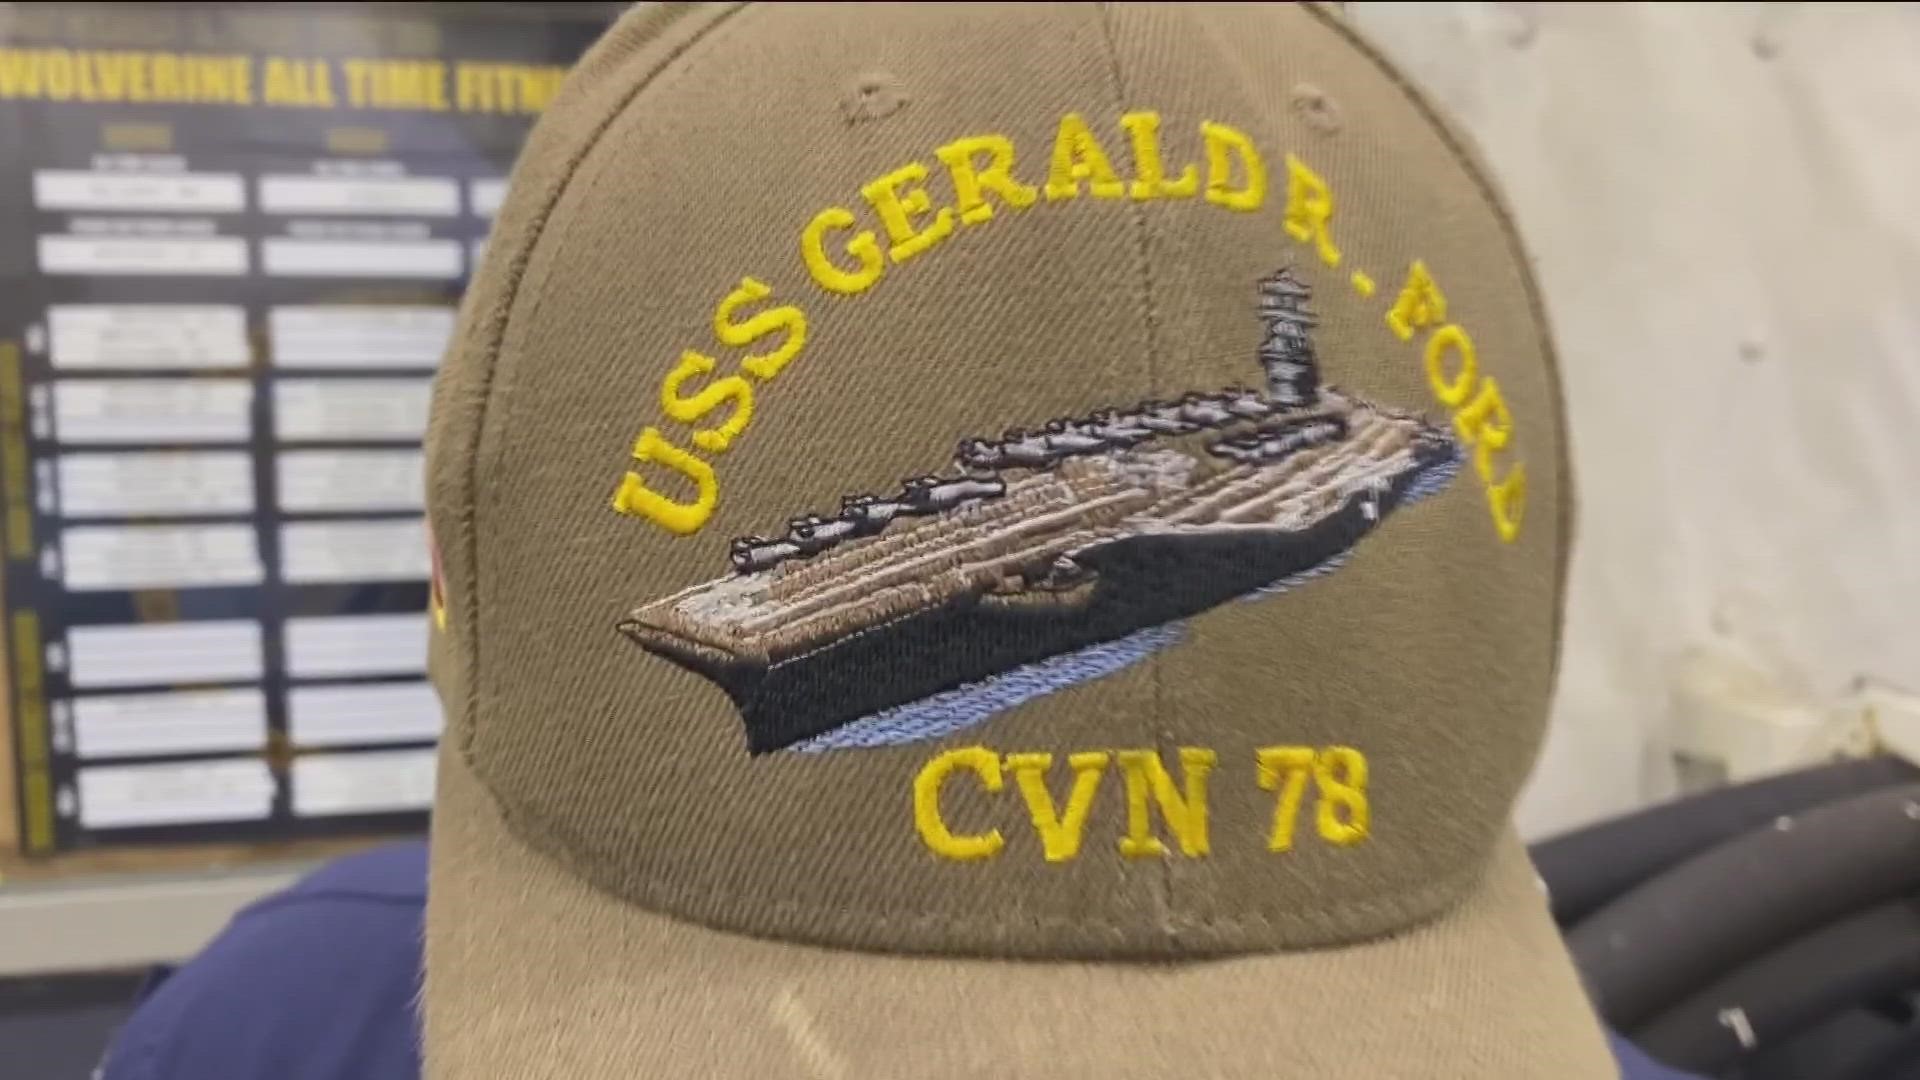 It’s homeport is Naval Station Norfolk, and CBS 8 was given a unique opportunity to tour the ship as part of the base’s "Sailor for a Day" experience.